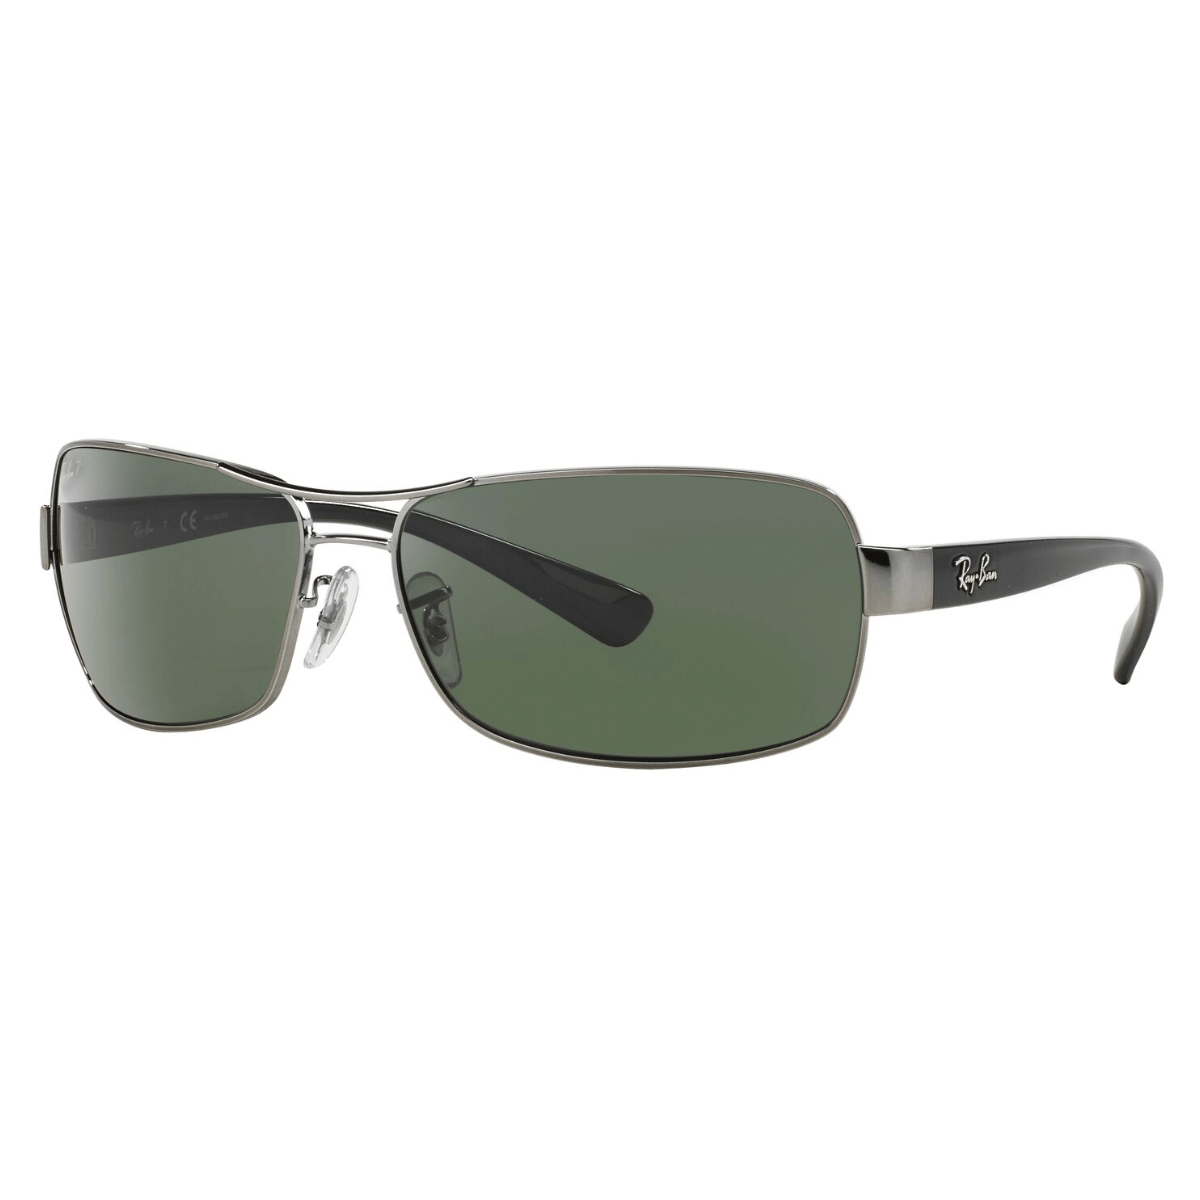 "Sophisticated Ray-Ban 3379 gunmetal sunglasses, featuring polarized green lenses for enhanced clarity, on display at Optorium."